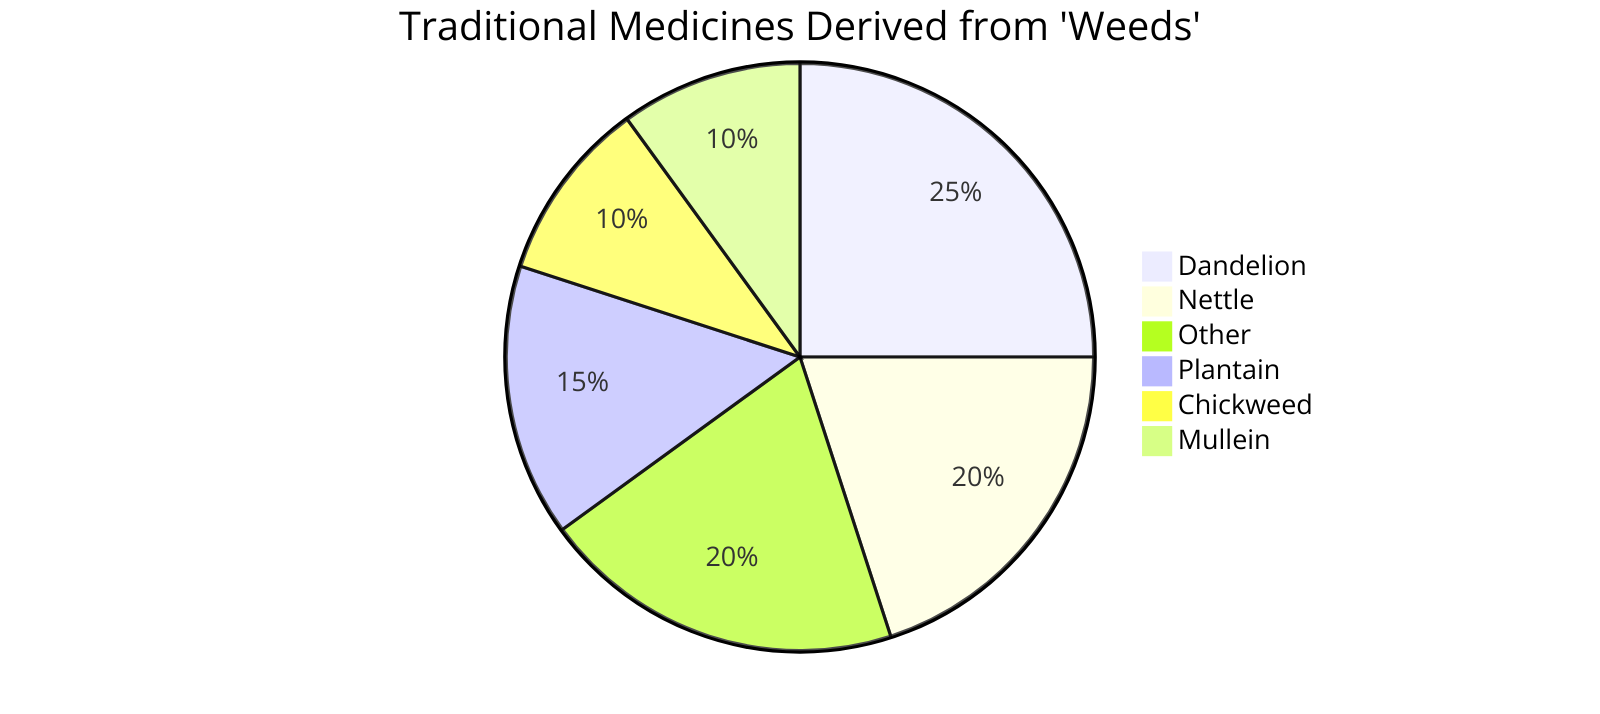 the percentage of traditional medicines derived from plants once considered weeds